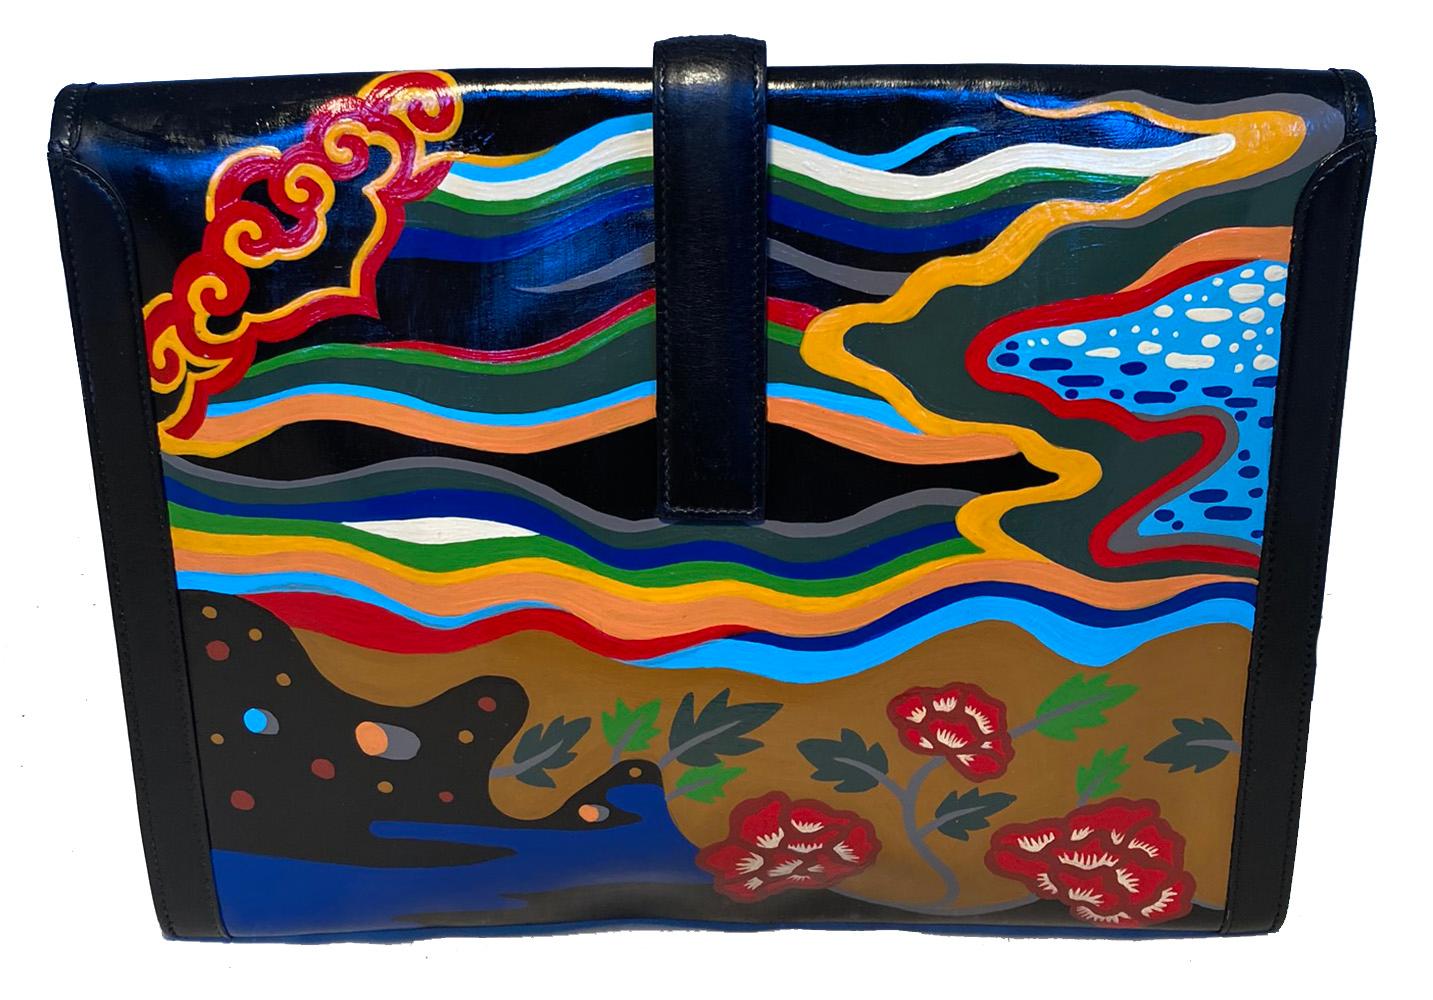 Hermes Hand Painted Jige Clutch in very good condition. Black box calf leather exterior in classic jige clutch shape with colorful abstract hand painted design throughout. Front strap flap closure opens to a woven beige canvas lined interior. Clean